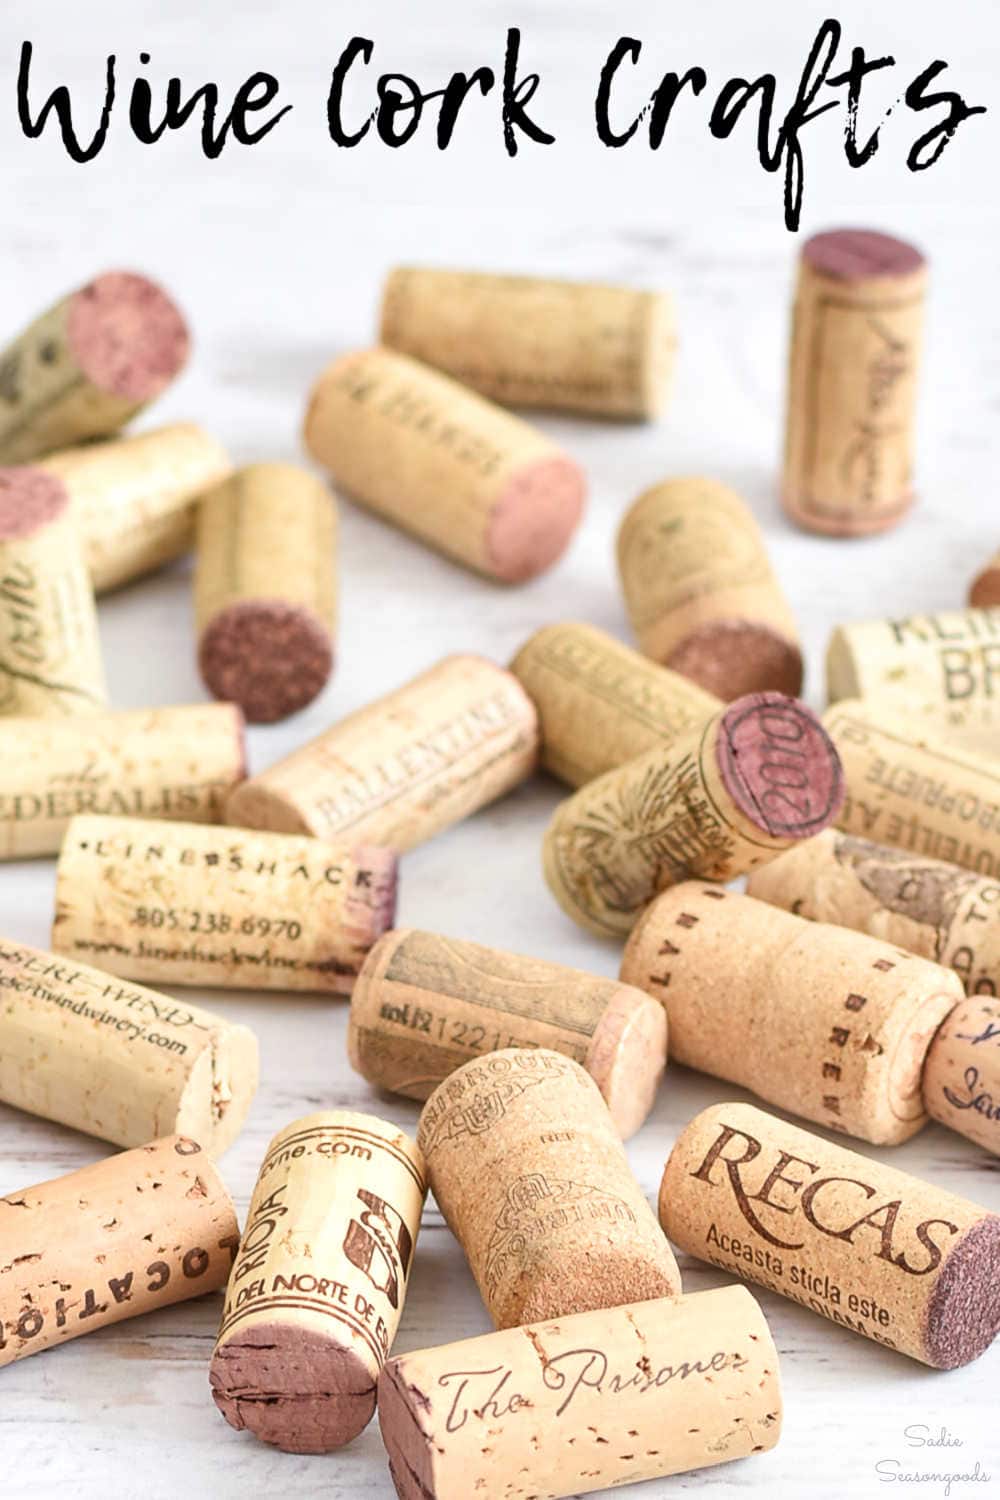 all sorts of wine cork crafts to try